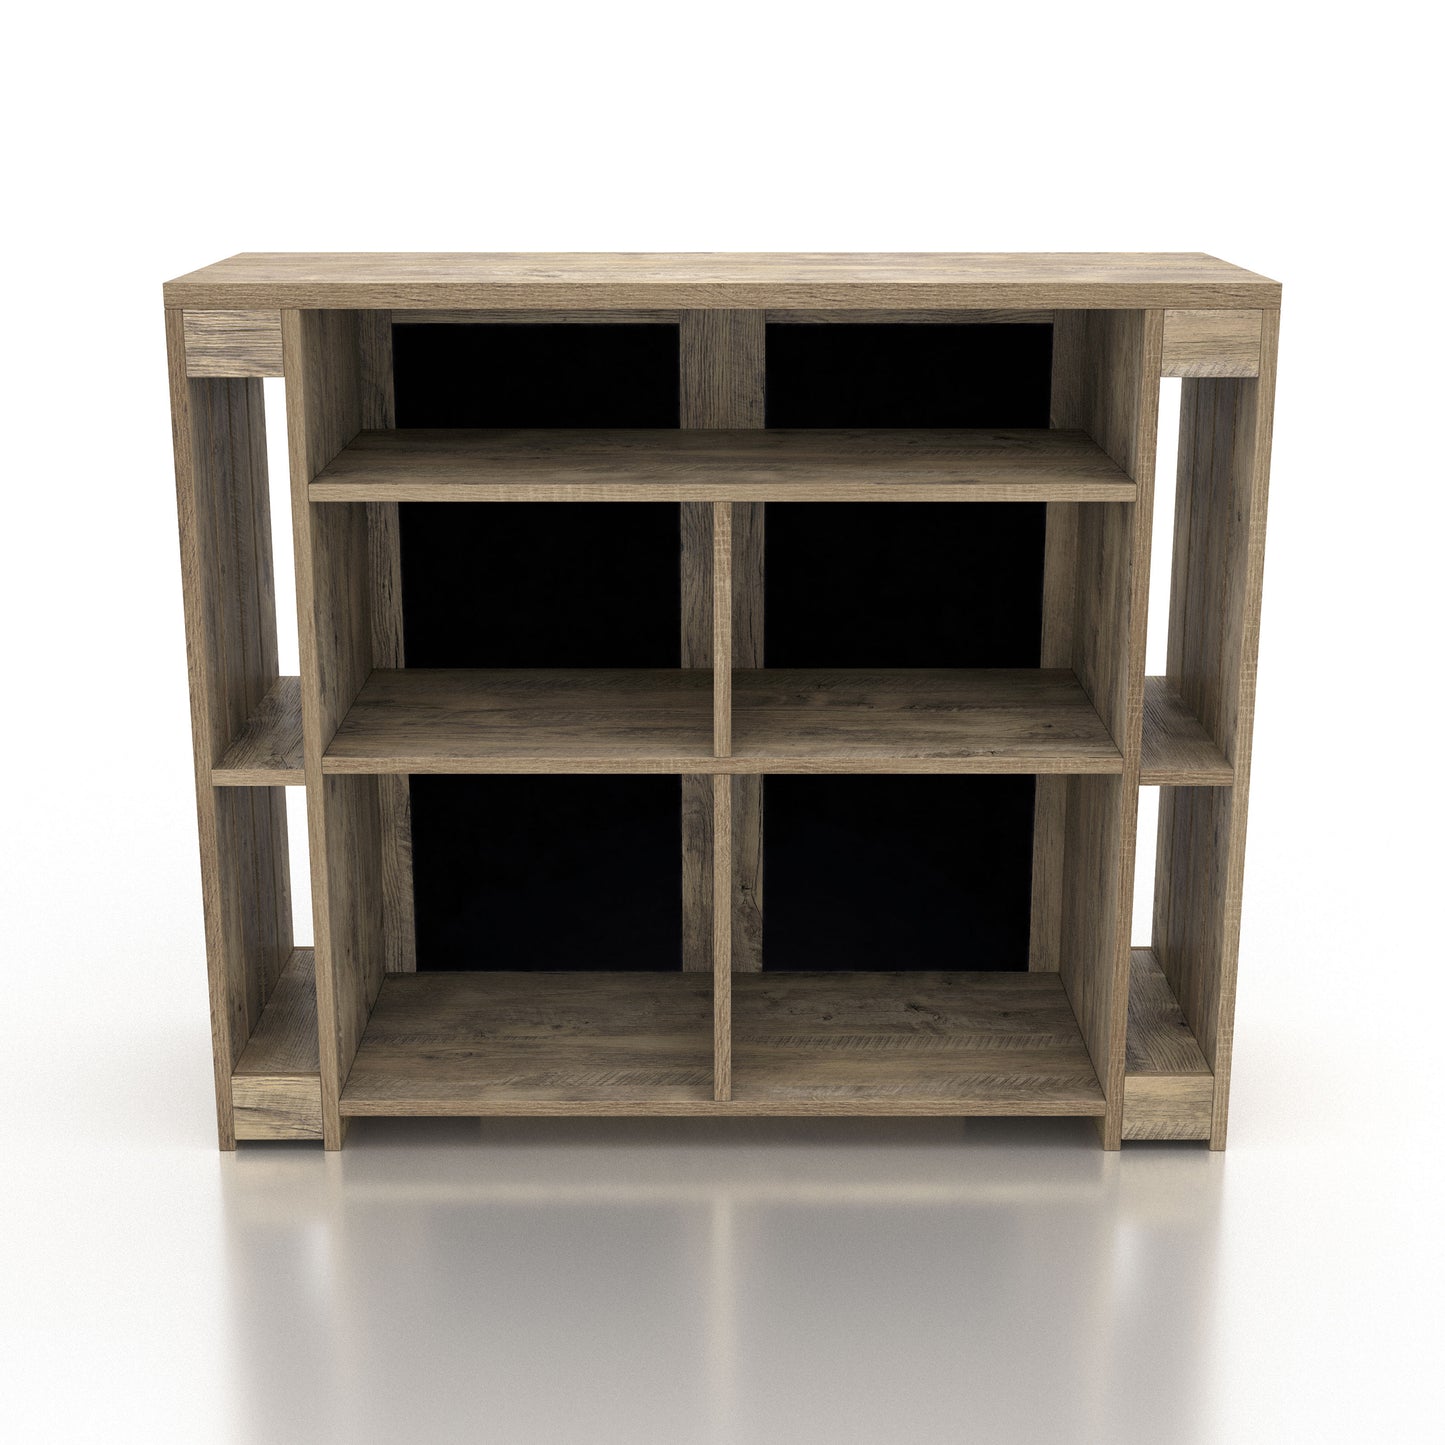 Front-facing back view of a rustic weathered oak nine-shelf home bar with chalkboard doors ion a white background